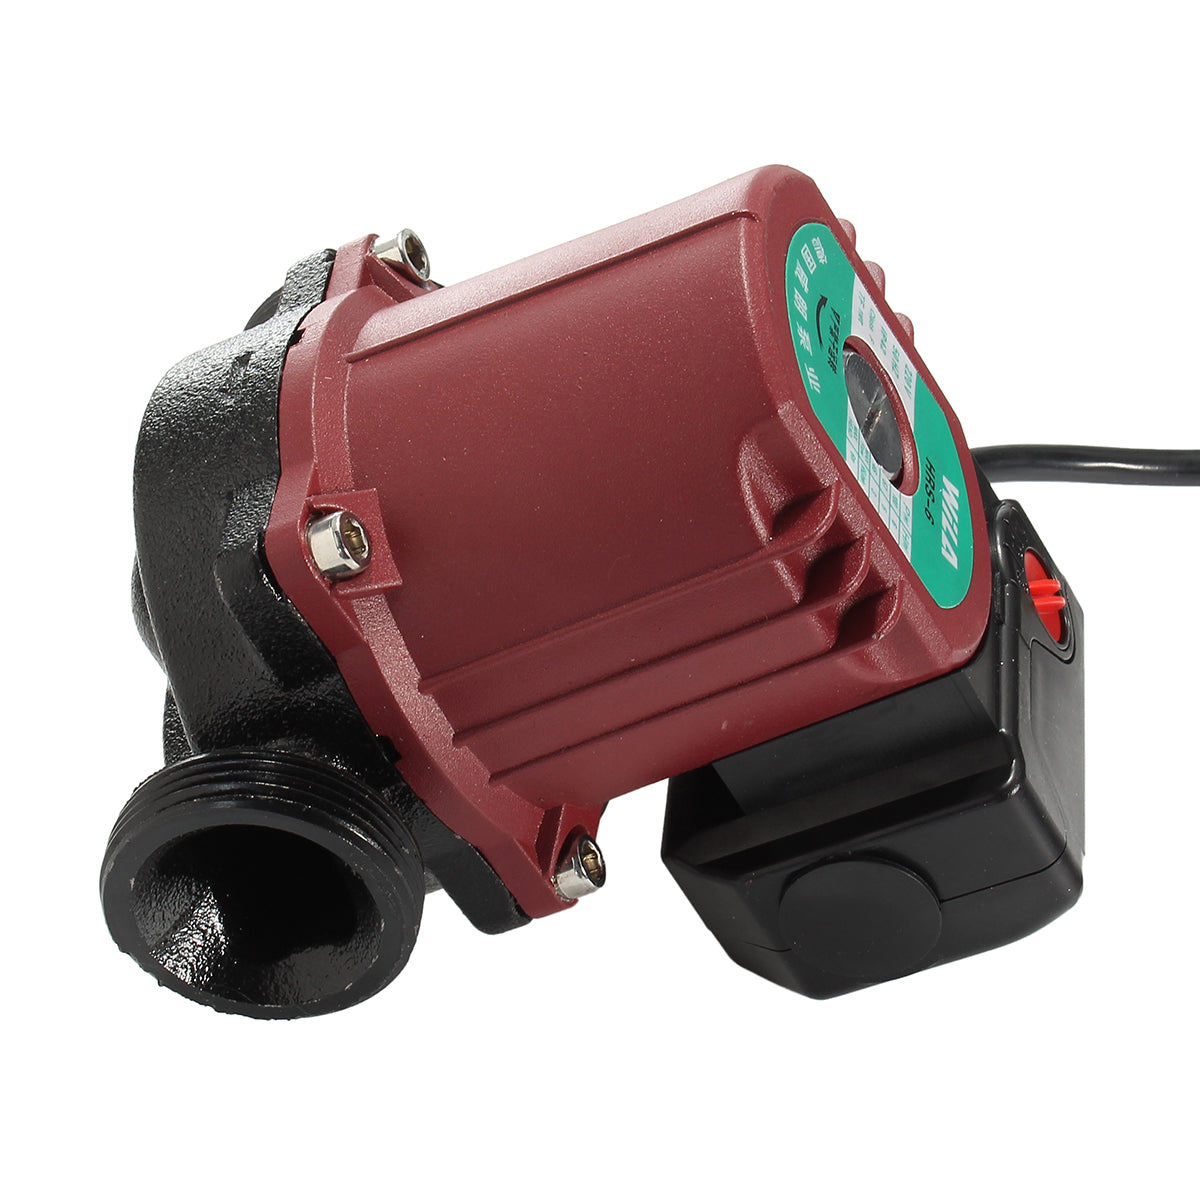 100W pump 1.5-inch floor heating and large flow shield pump central heating circulation pump